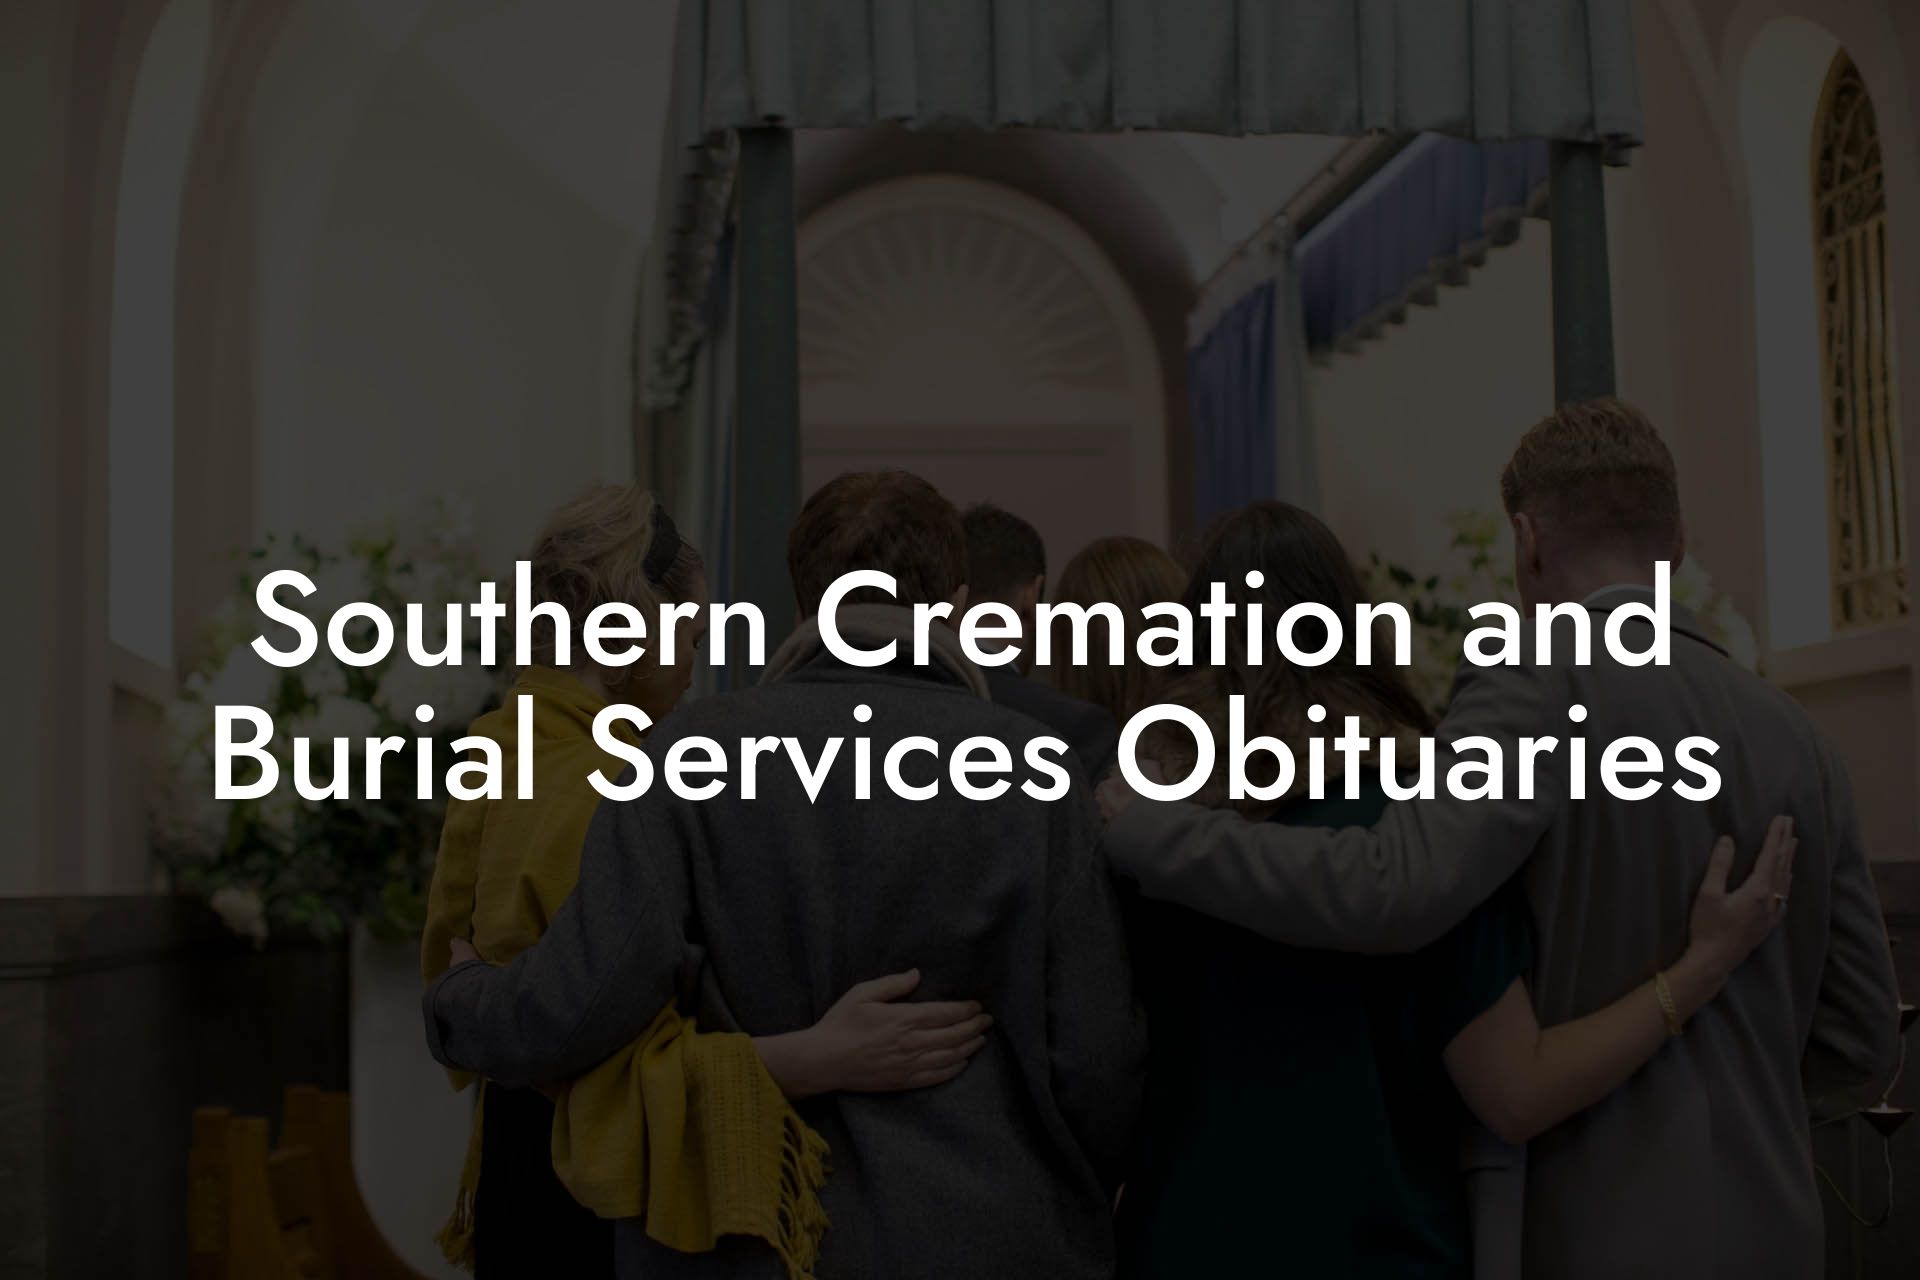 Southern Cremation and Burial Services Obituaries